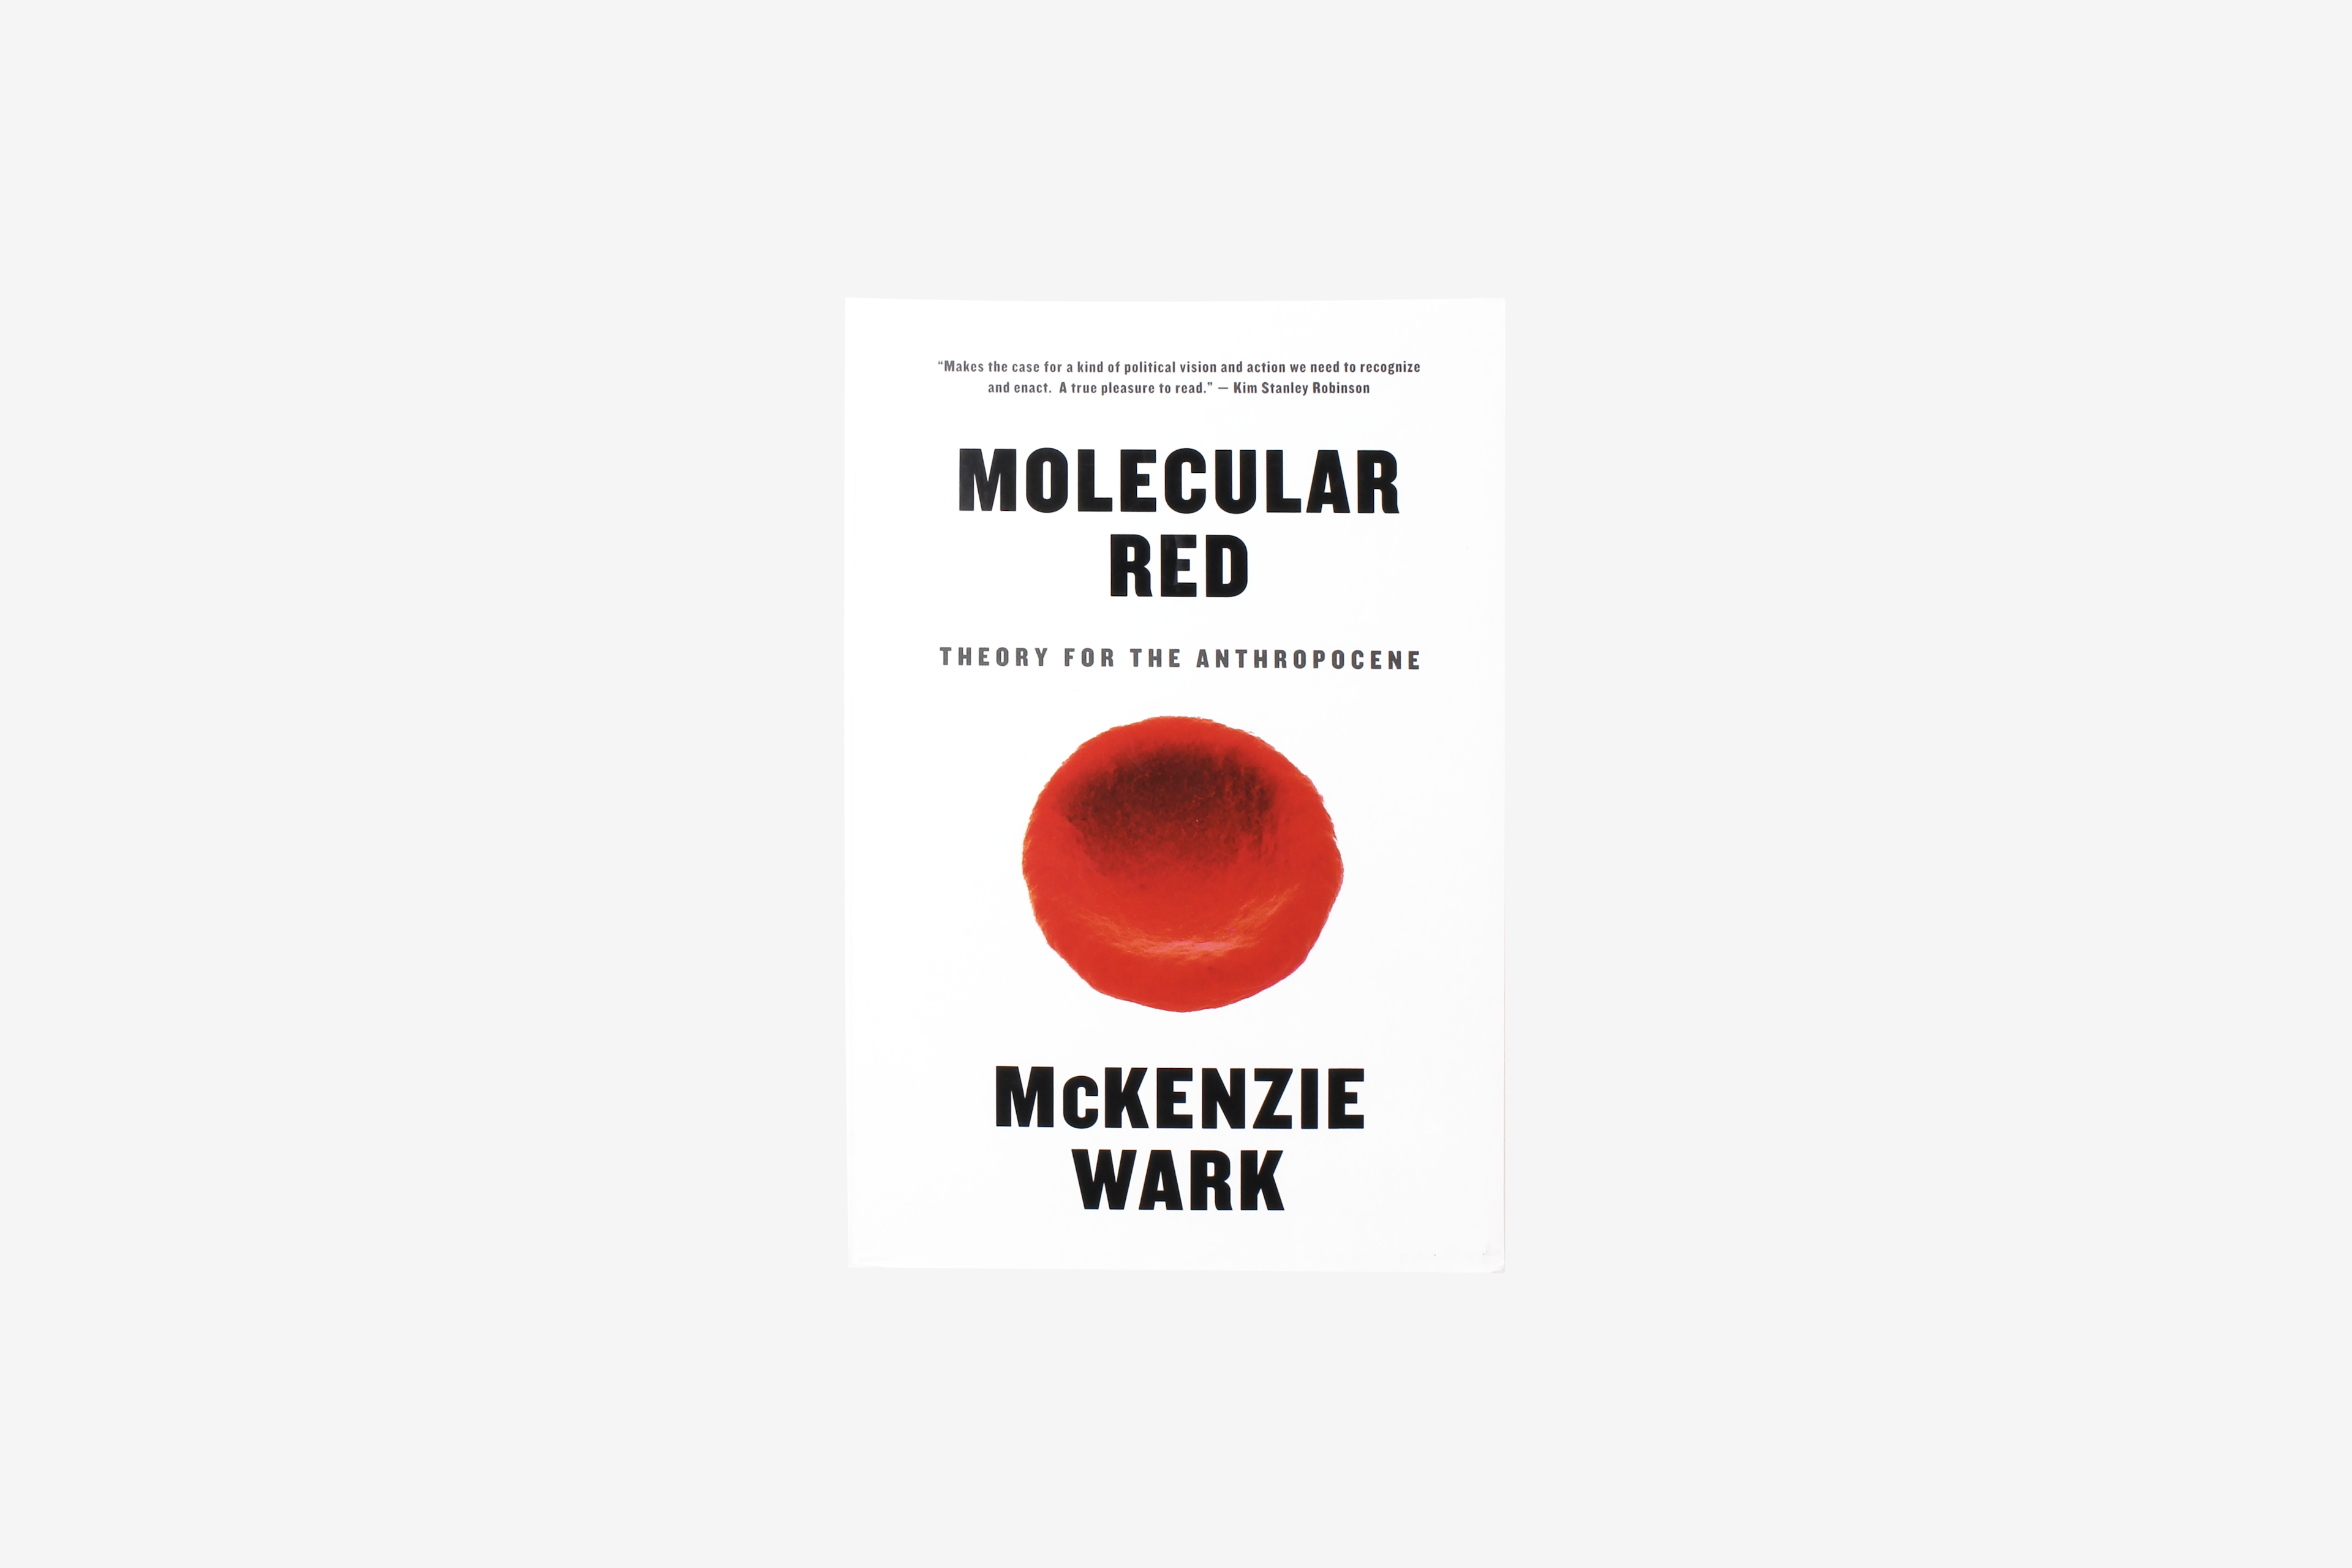 Molecular Red: Theory for the Anthropocene